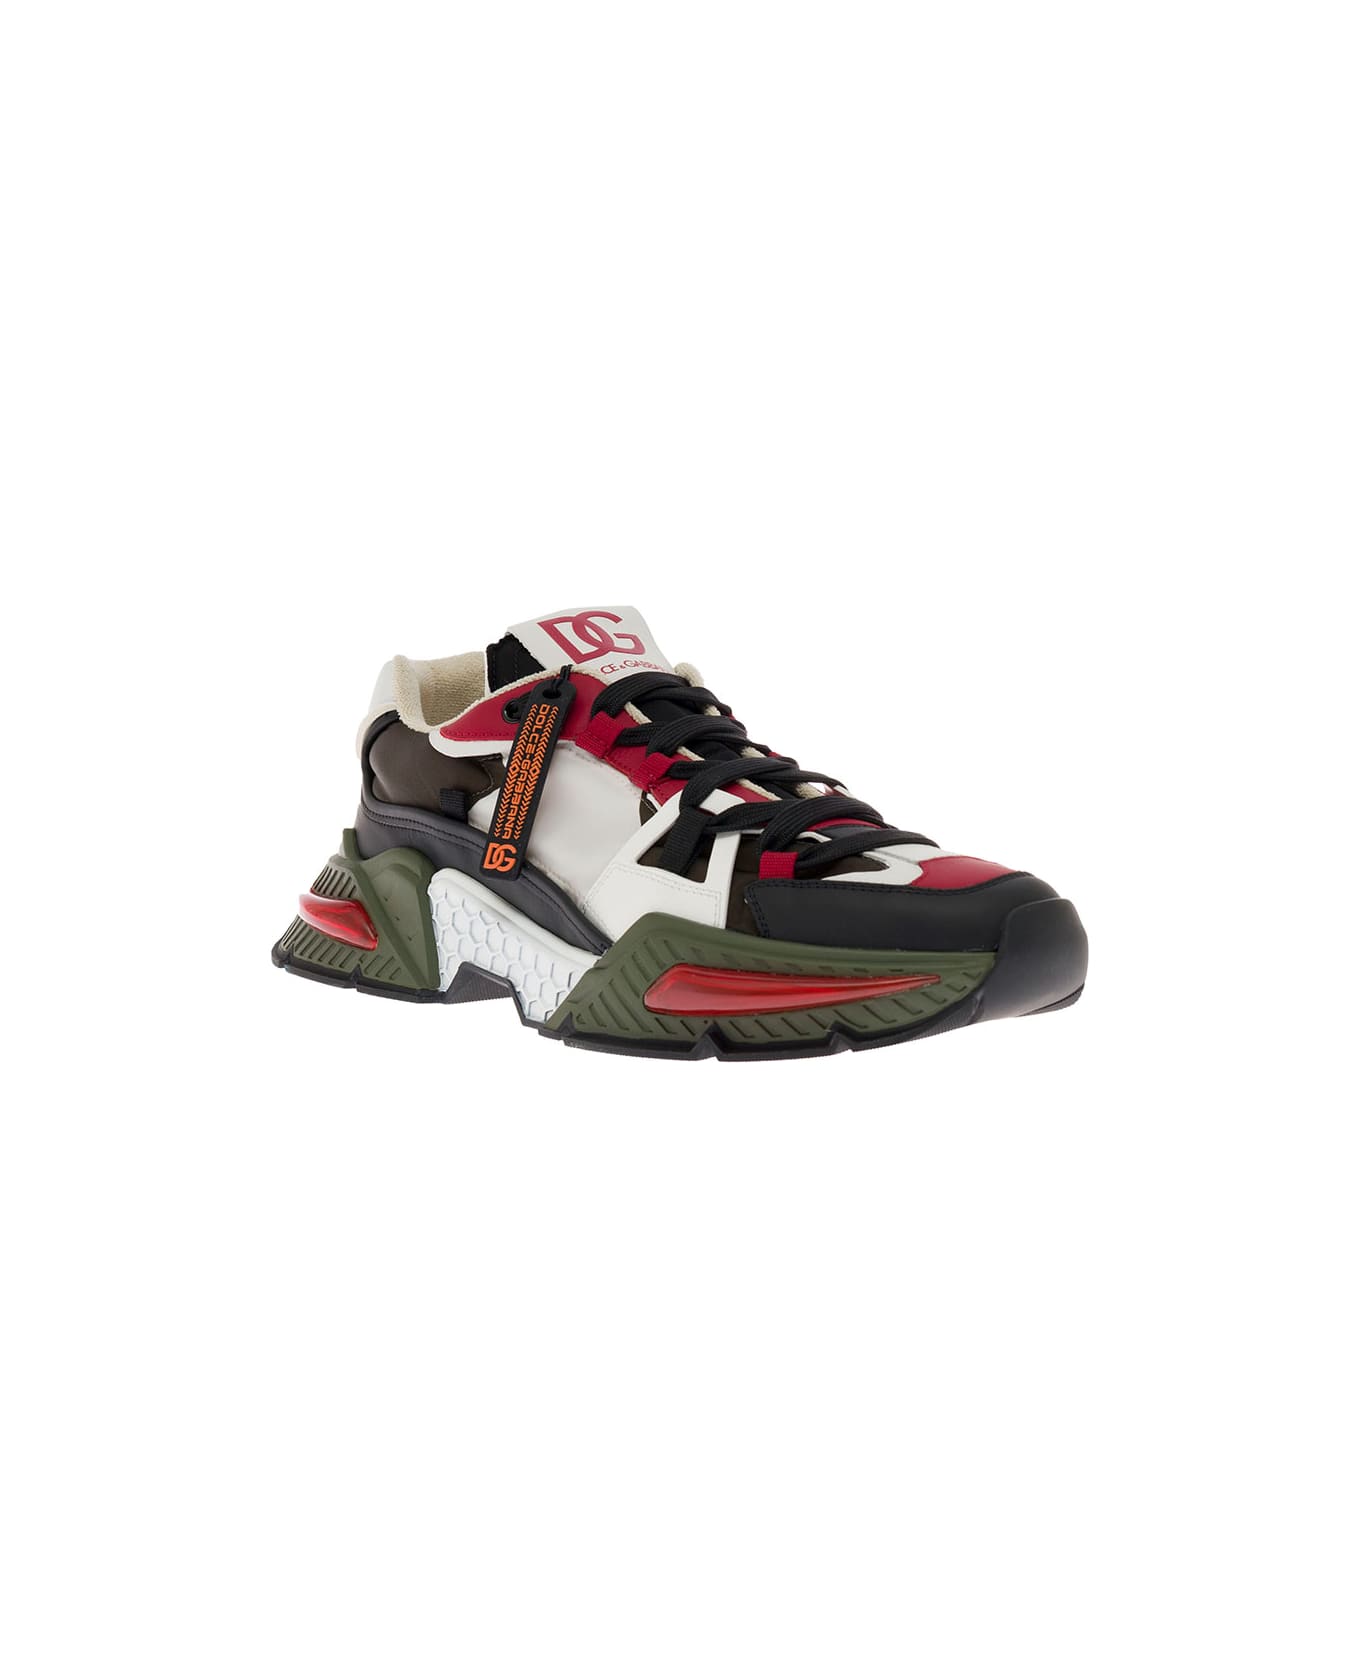 Dolce & Gabbana Dolce & Gaacbbana Man's Airmaster Multicolor Mix Of Materials Sneakers - Multicolor